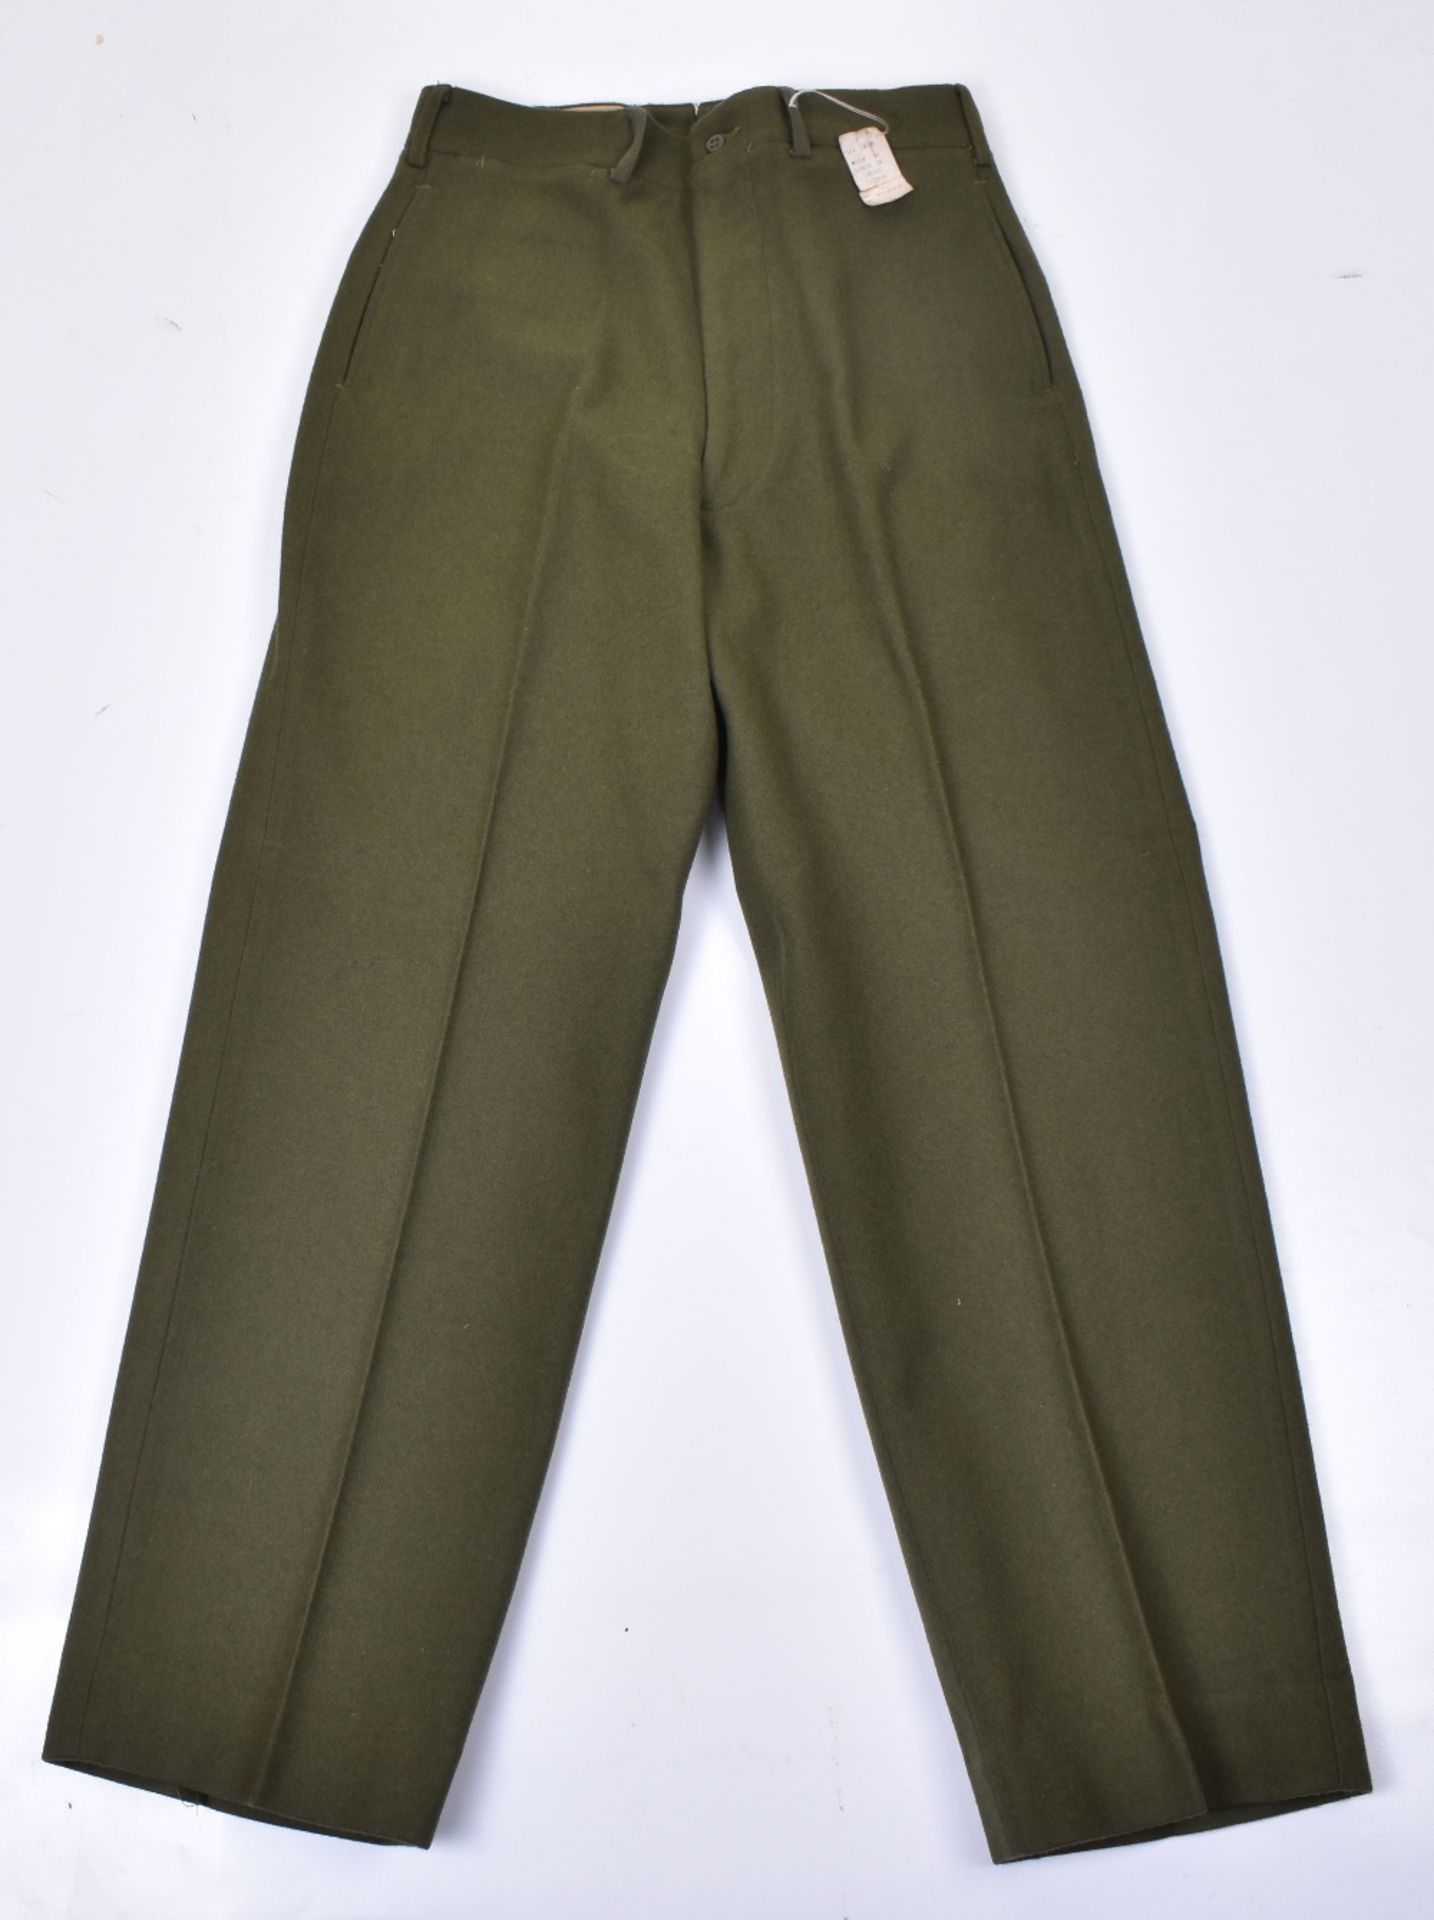 WW2 American Military Ike Jacket and Trousers - Image 9 of 12